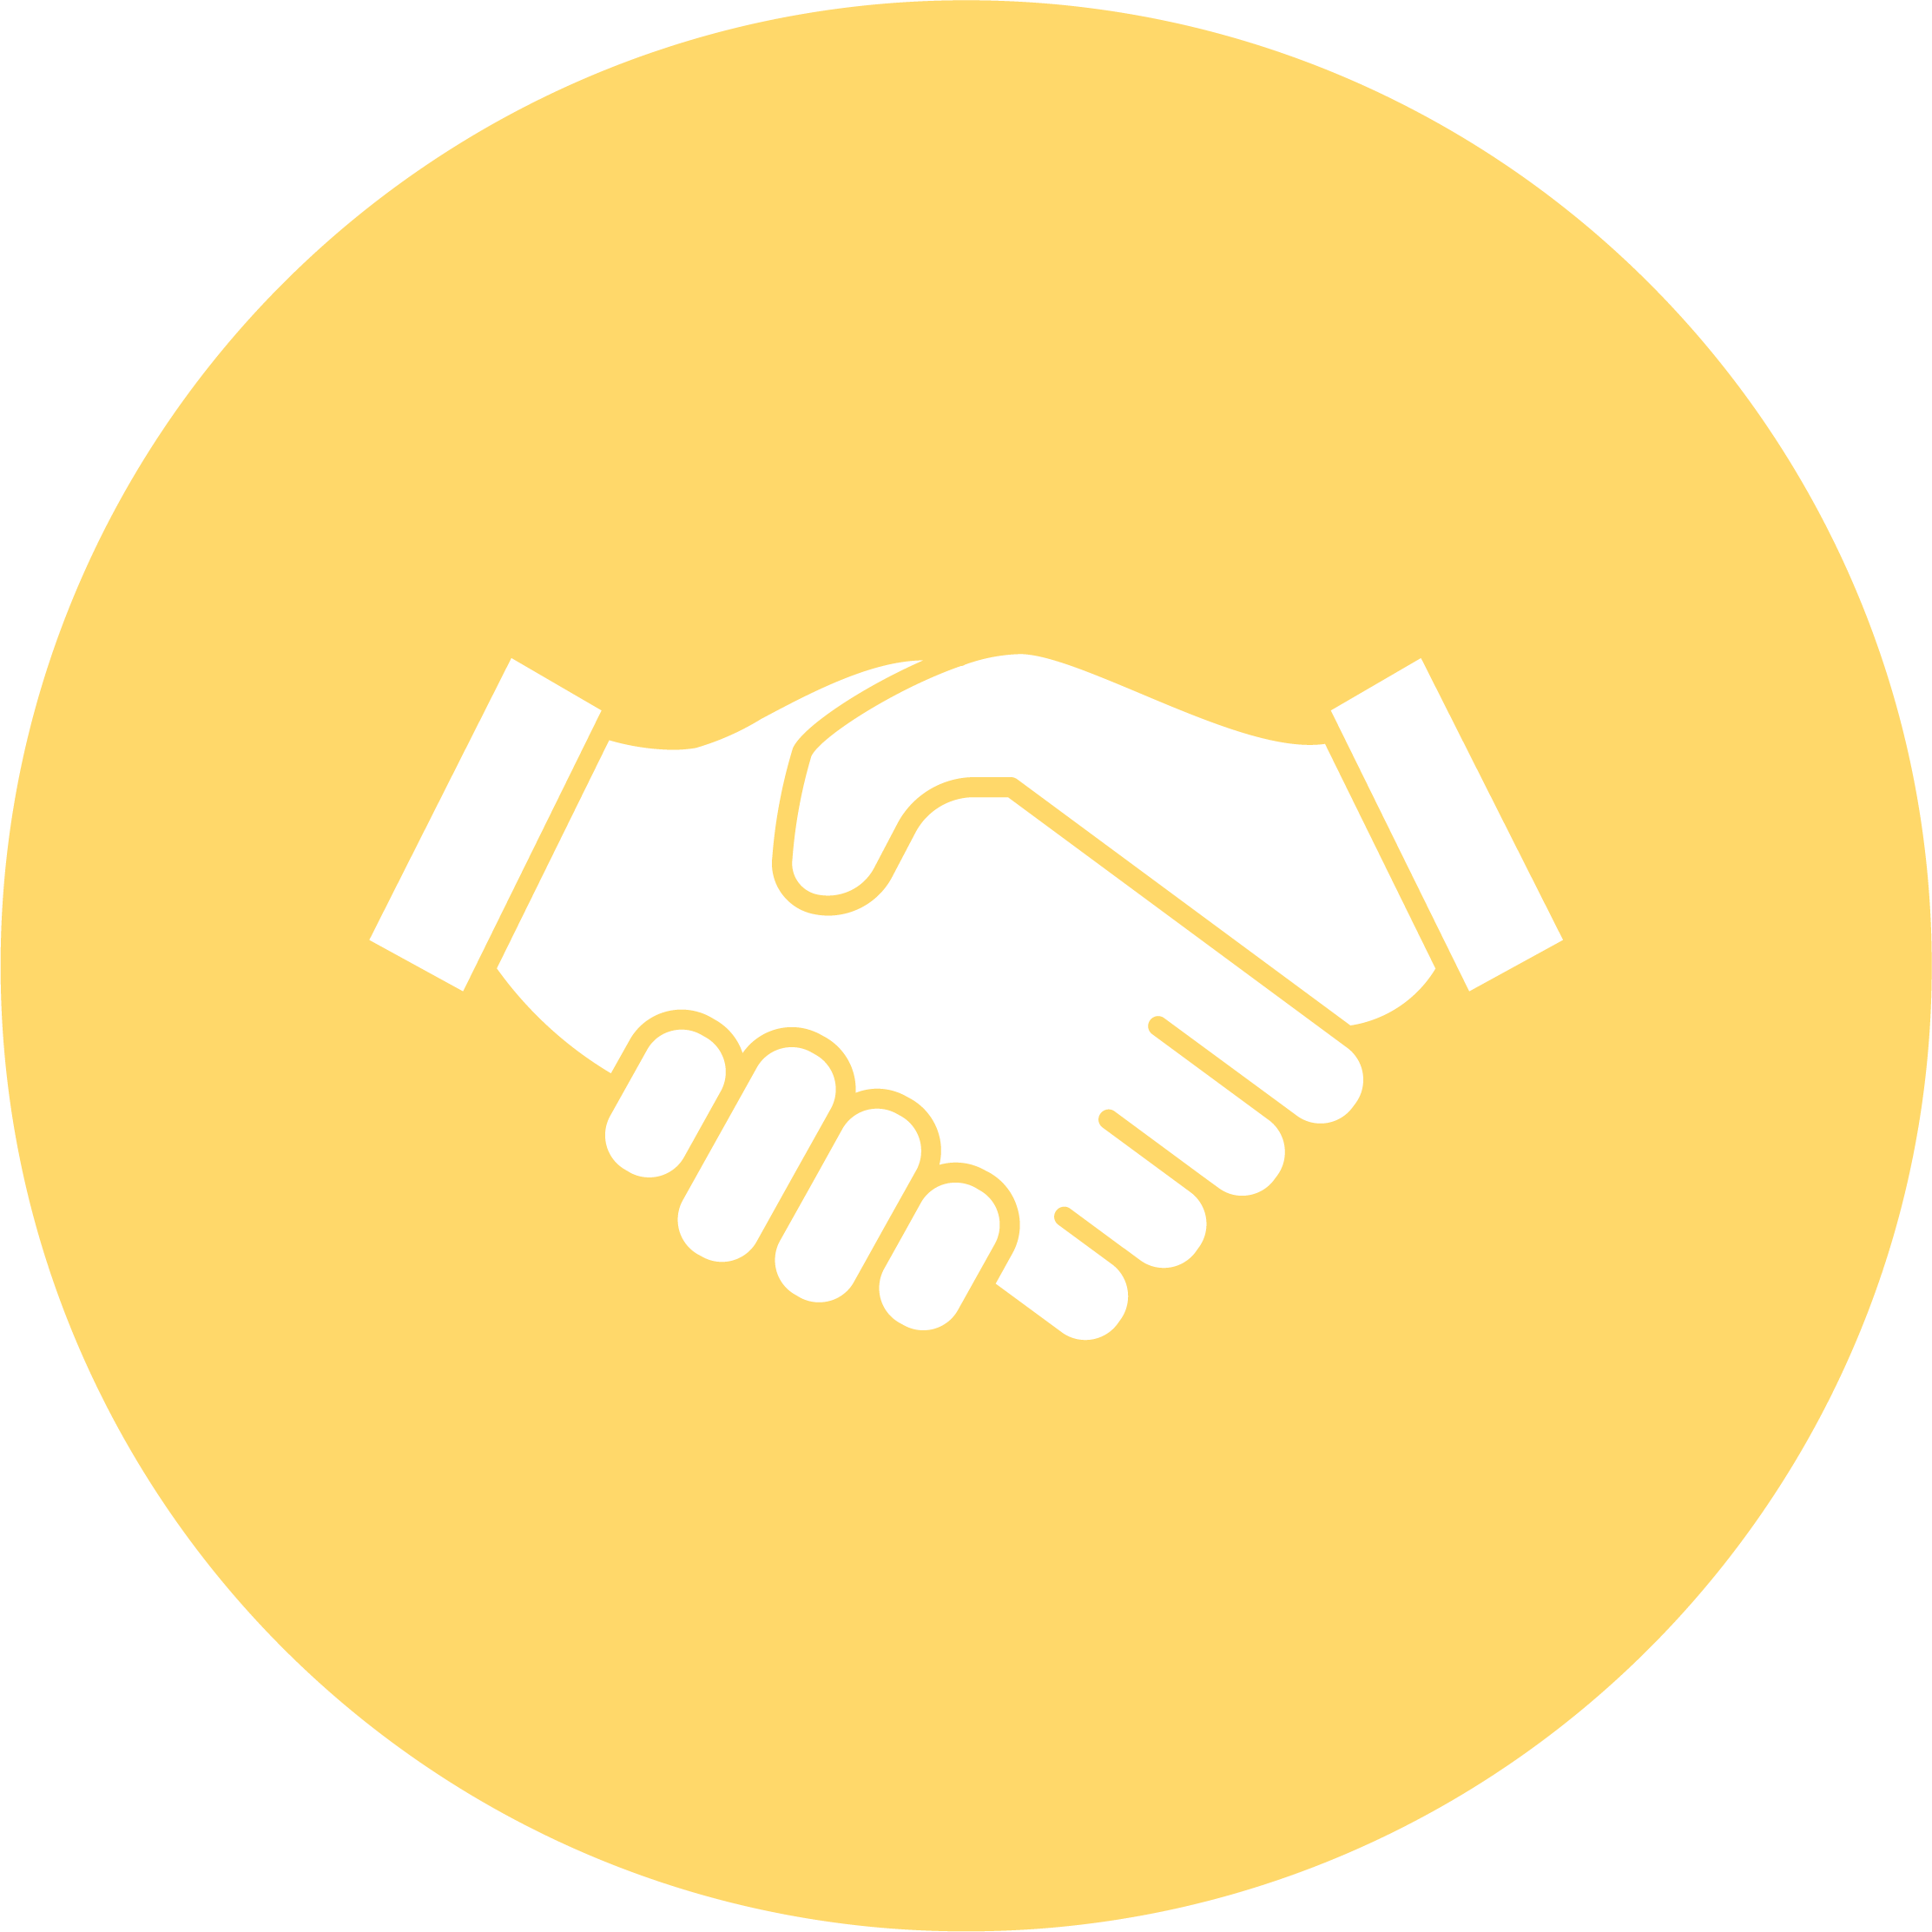 A yellow circle with a handshake icon representing Fleet Advisory Services.